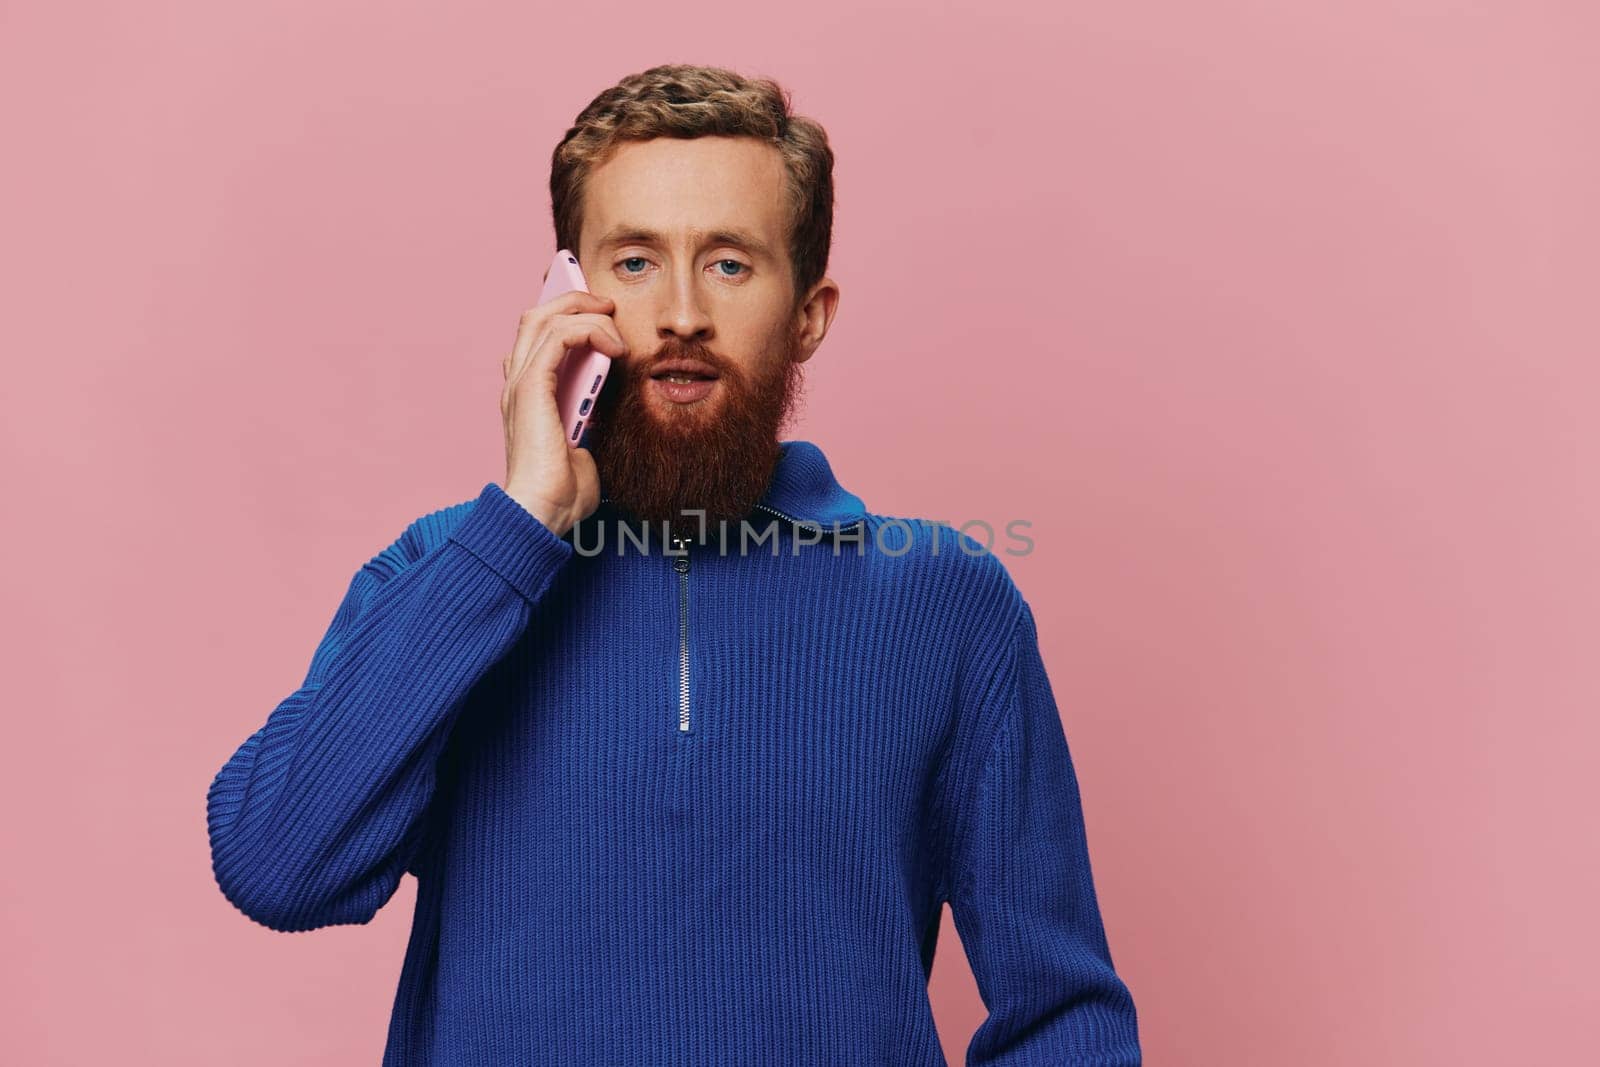 Portrait of a man with a phone in his hands doing looking at it and talking on the phone, on a pink background. Communicating online social media, lifestyle. High quality photo